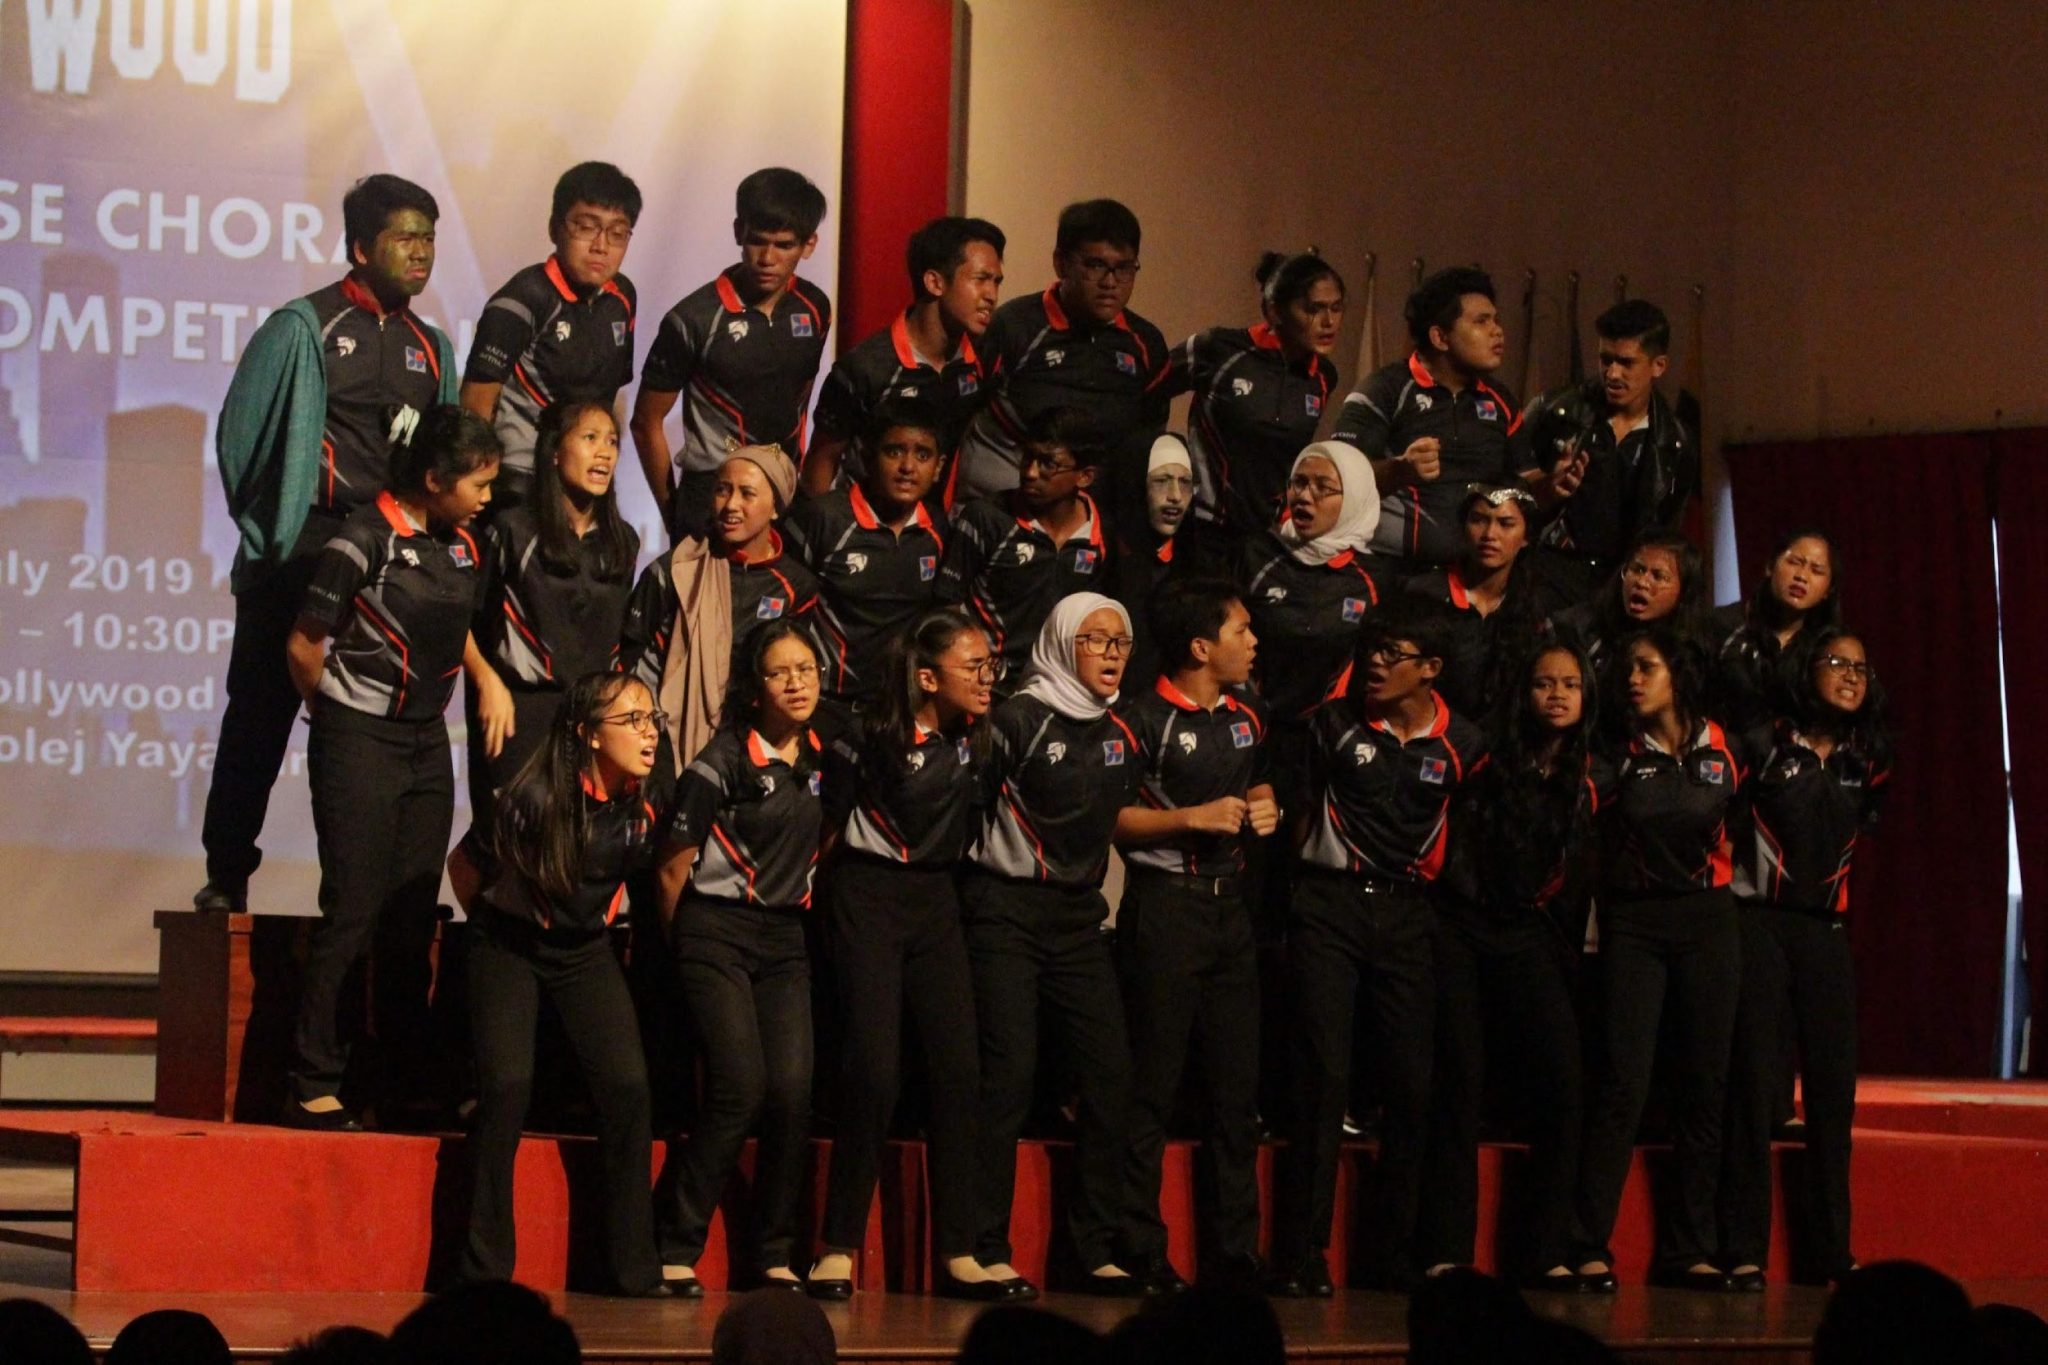 Choral Speaking Goes Hollywood - Cemerlang